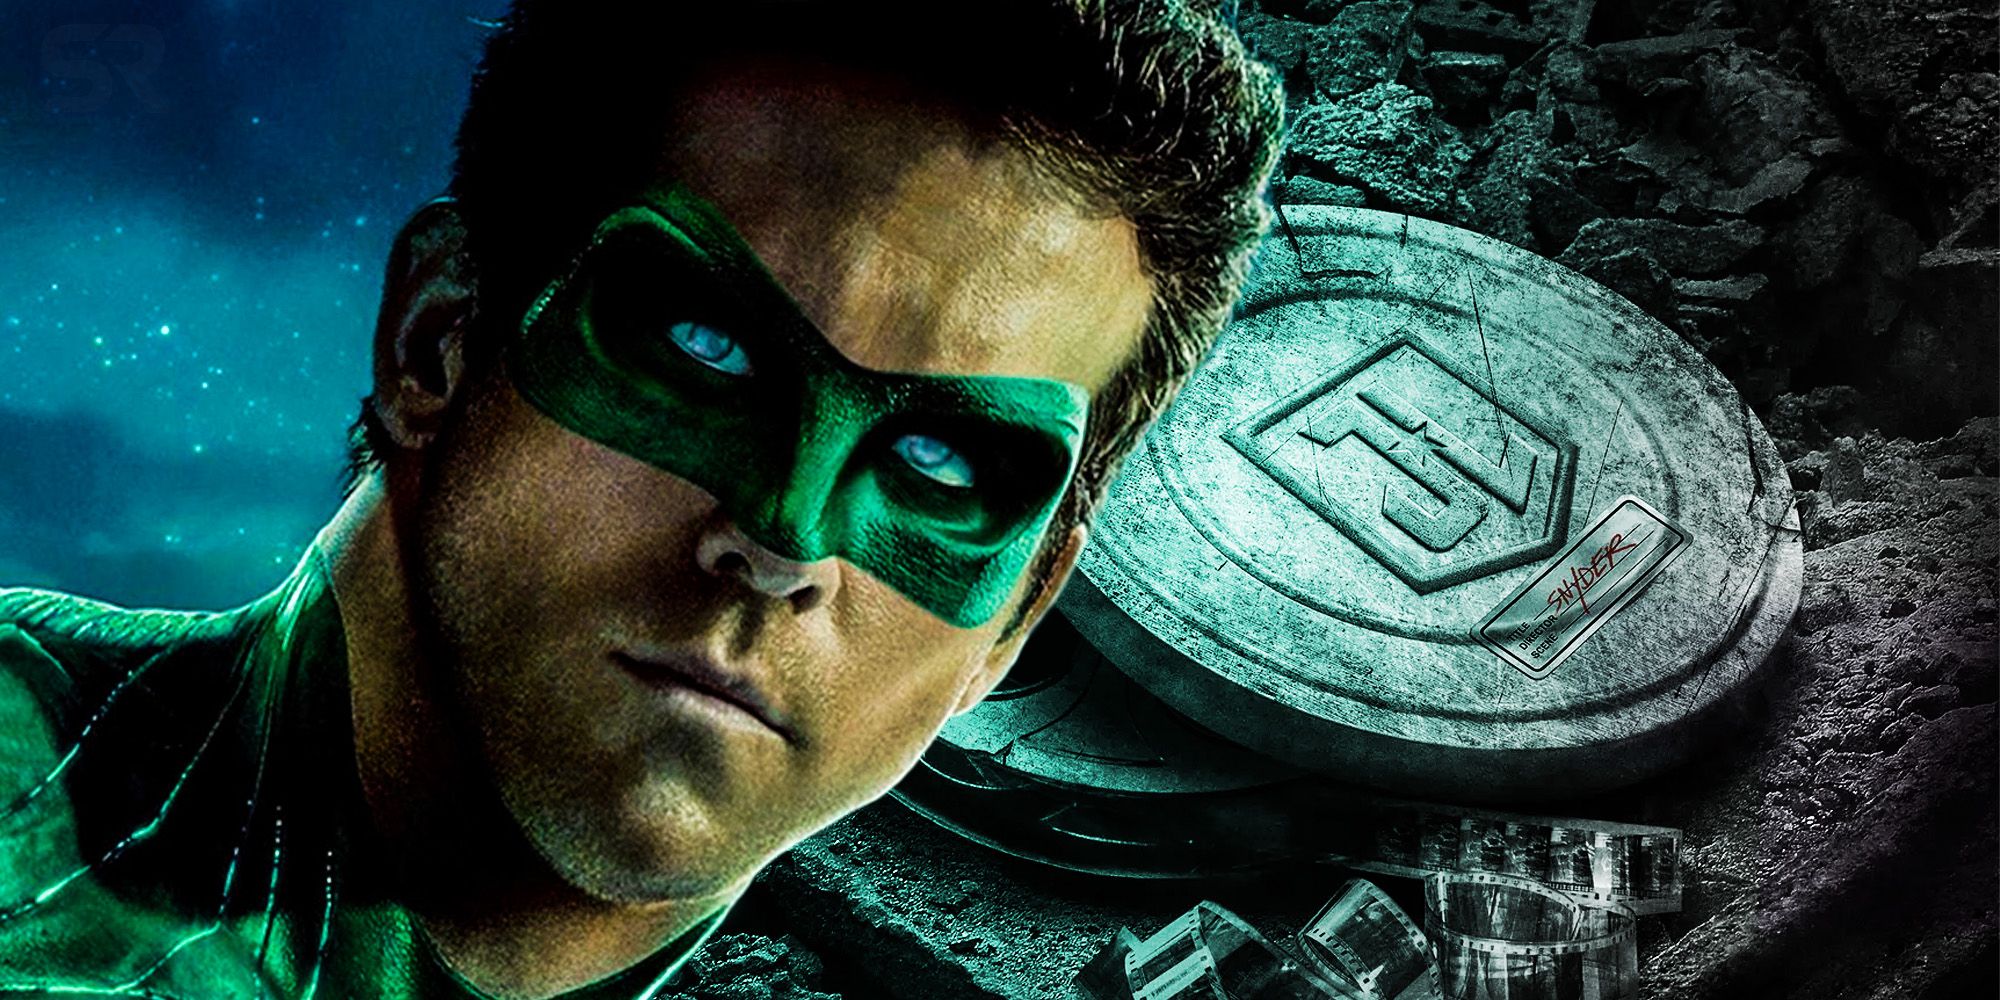 Green lantern justice league Snyder cut cameo